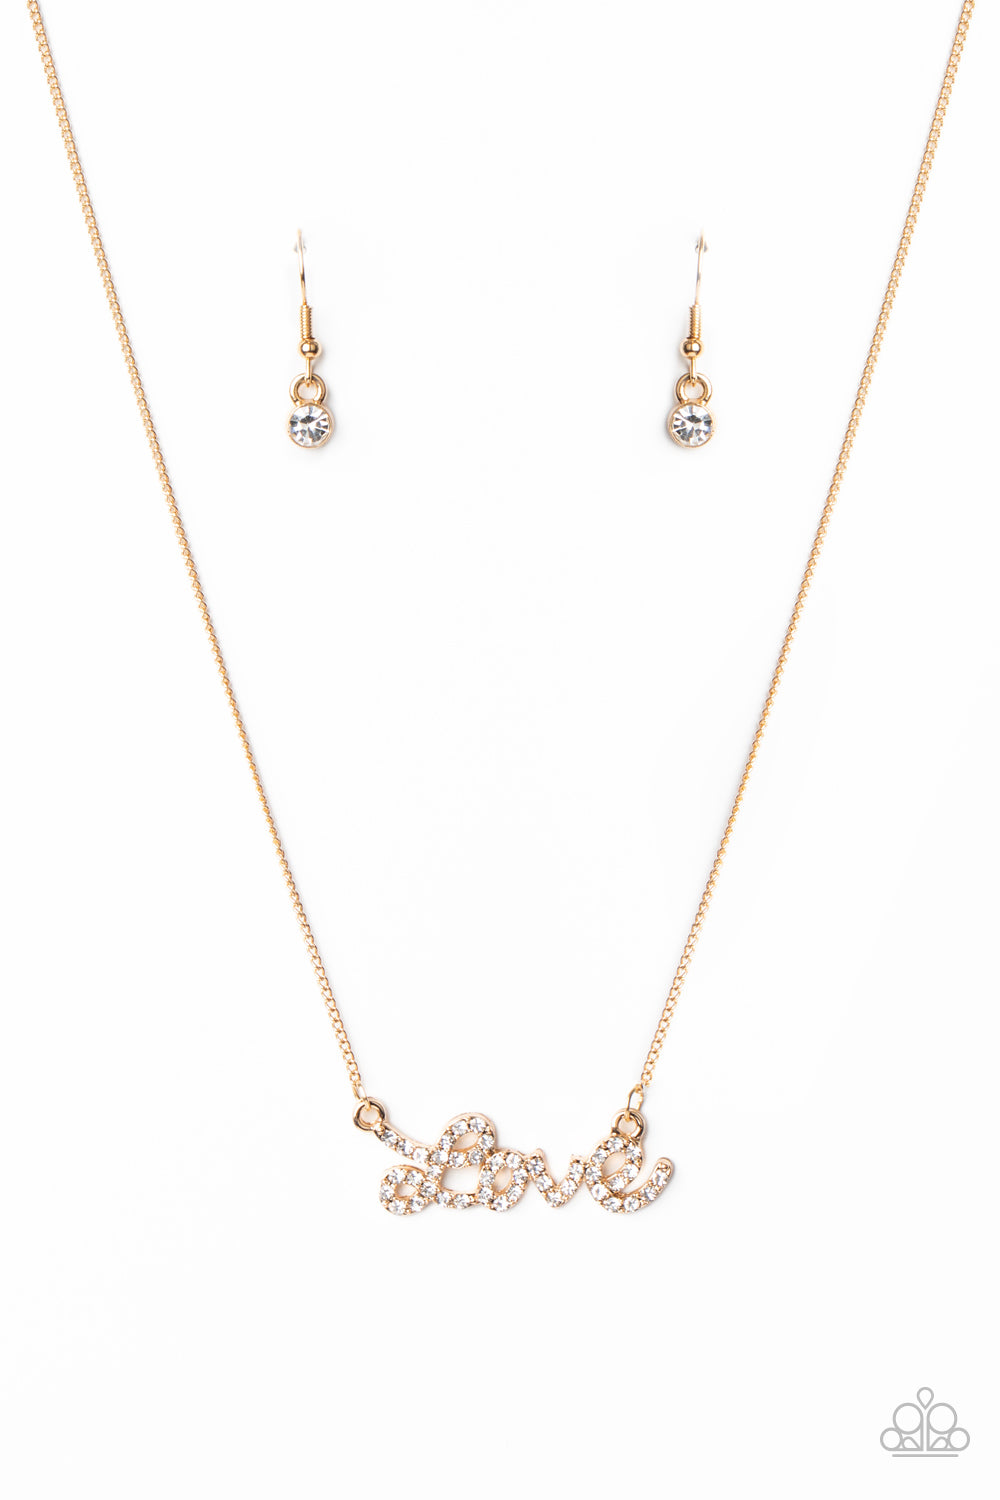 Paparazzi Accessories Head Over Heels in Love - Gold Necklaces - Lady T Accessories